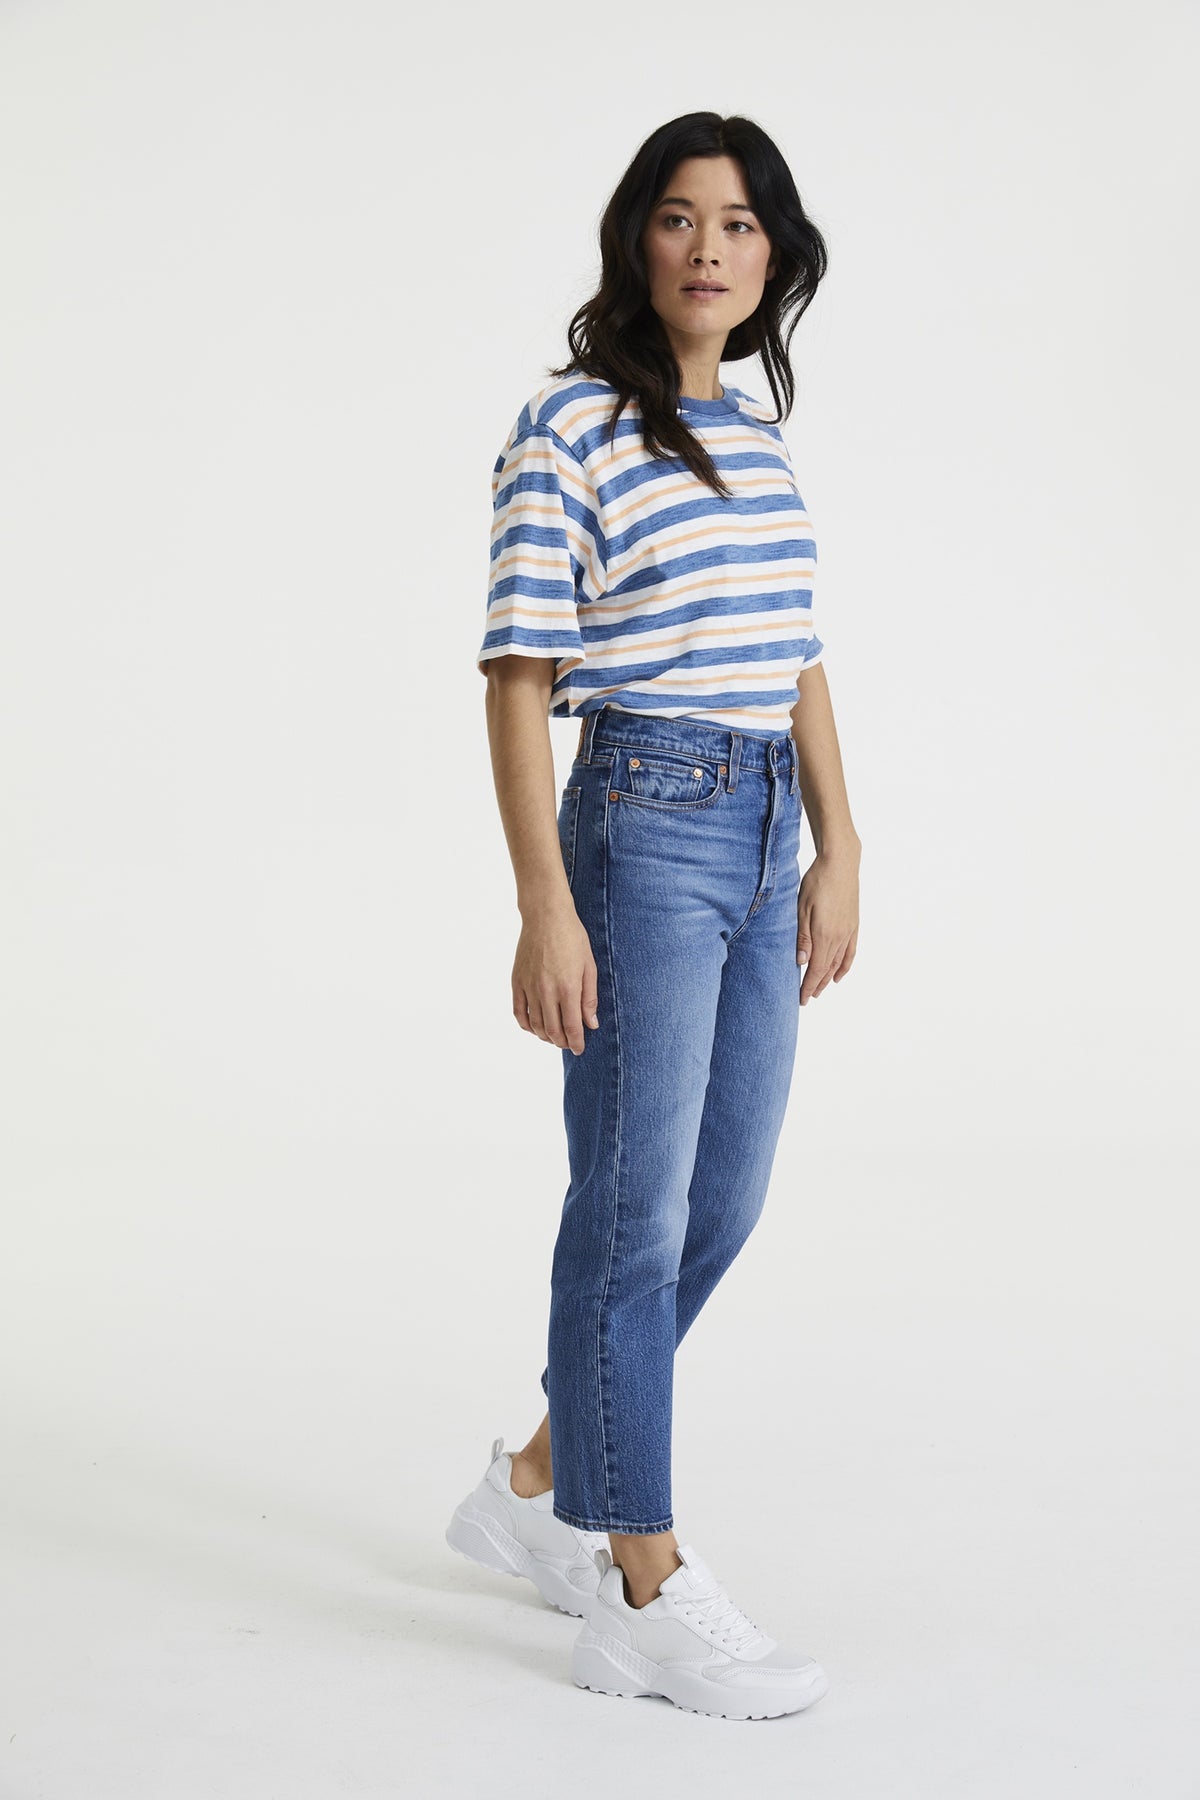 levi's high rise wedgie fit jeans